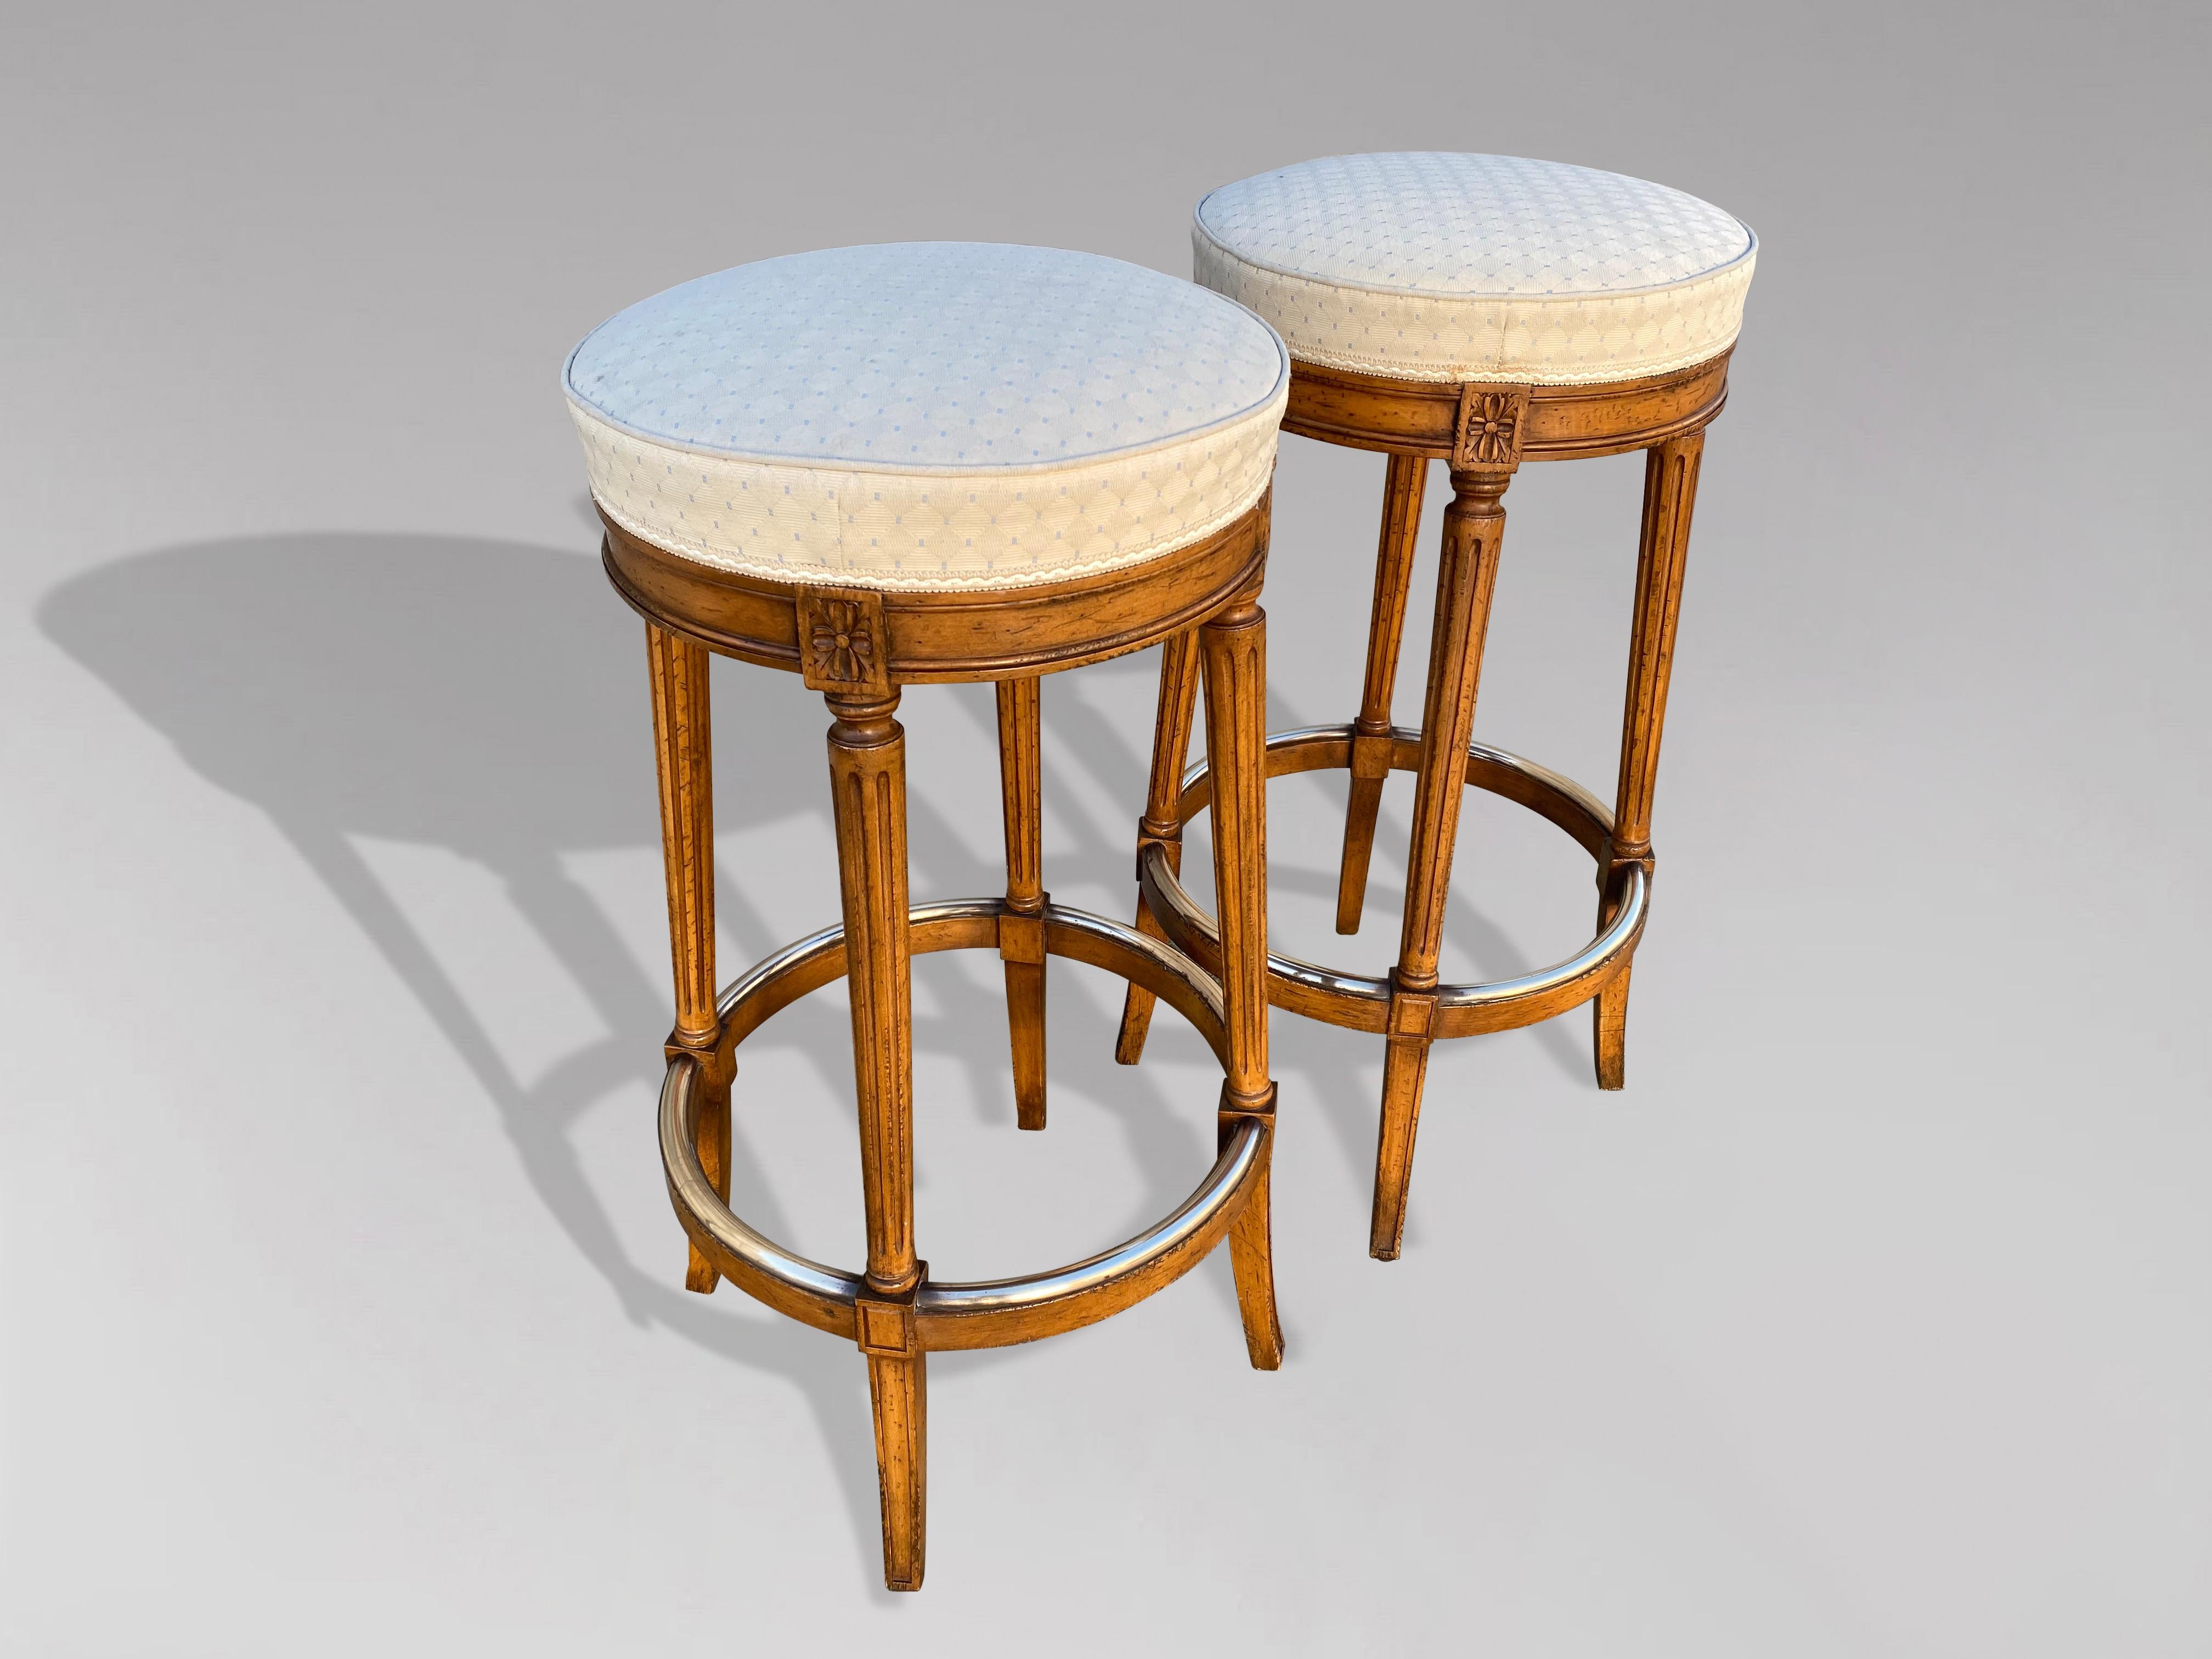 Pair of Mid-20th Century French Walnut Bistro Bar Stools In Good Condition In Petworth,West Sussex, GB